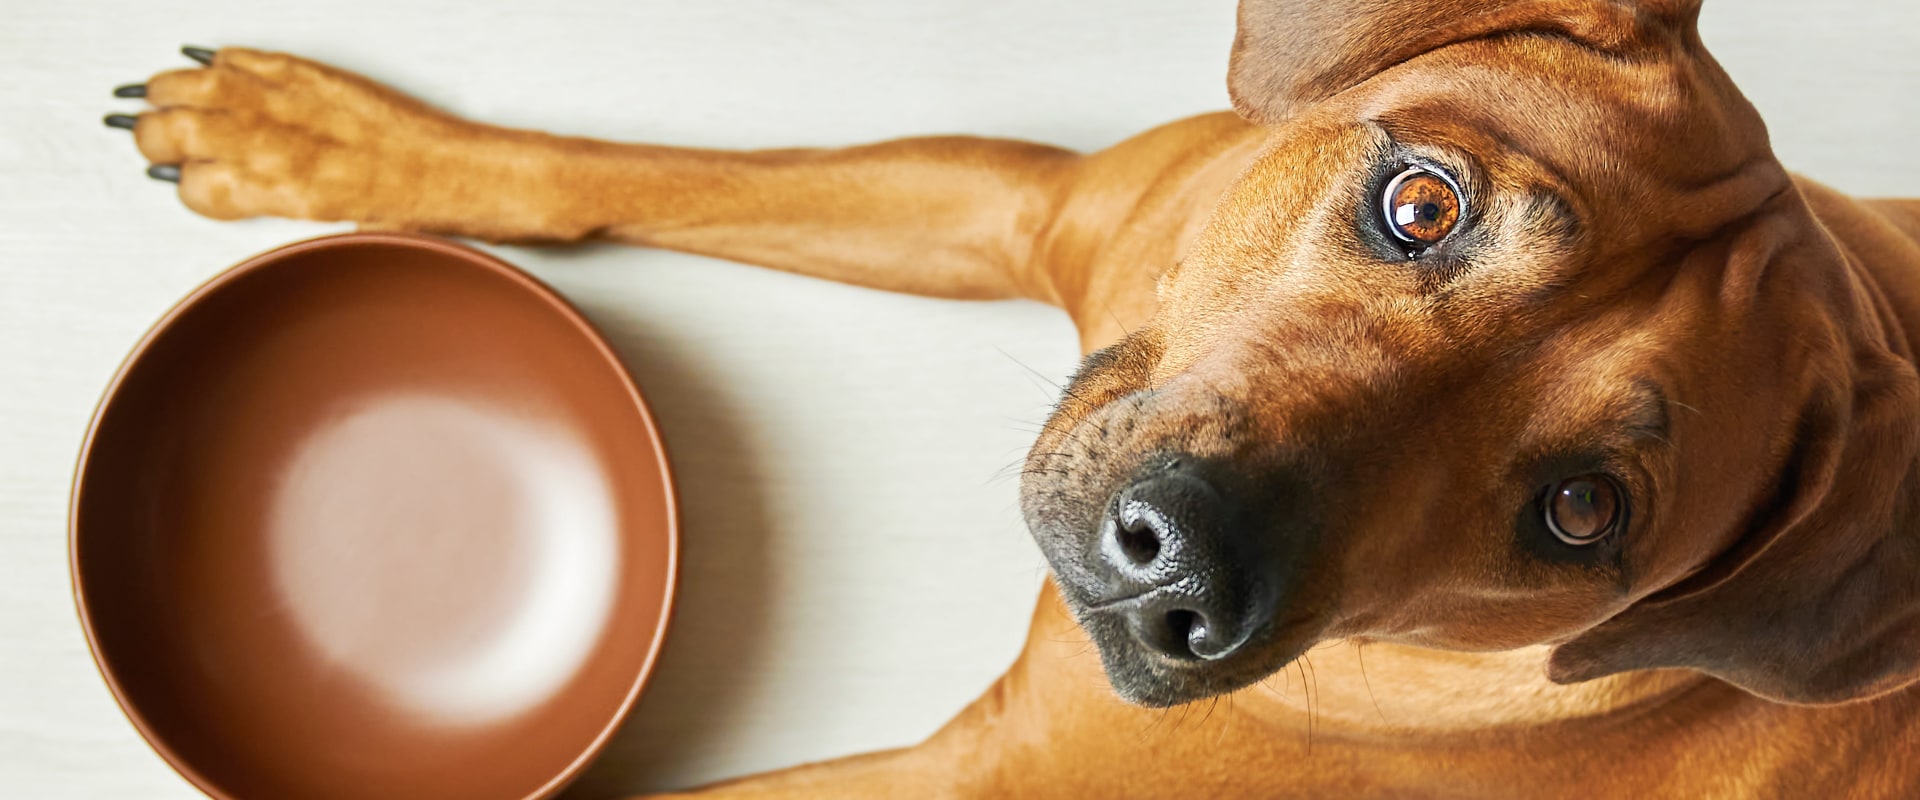 What Dog Food Do Vets Actually Recommend?